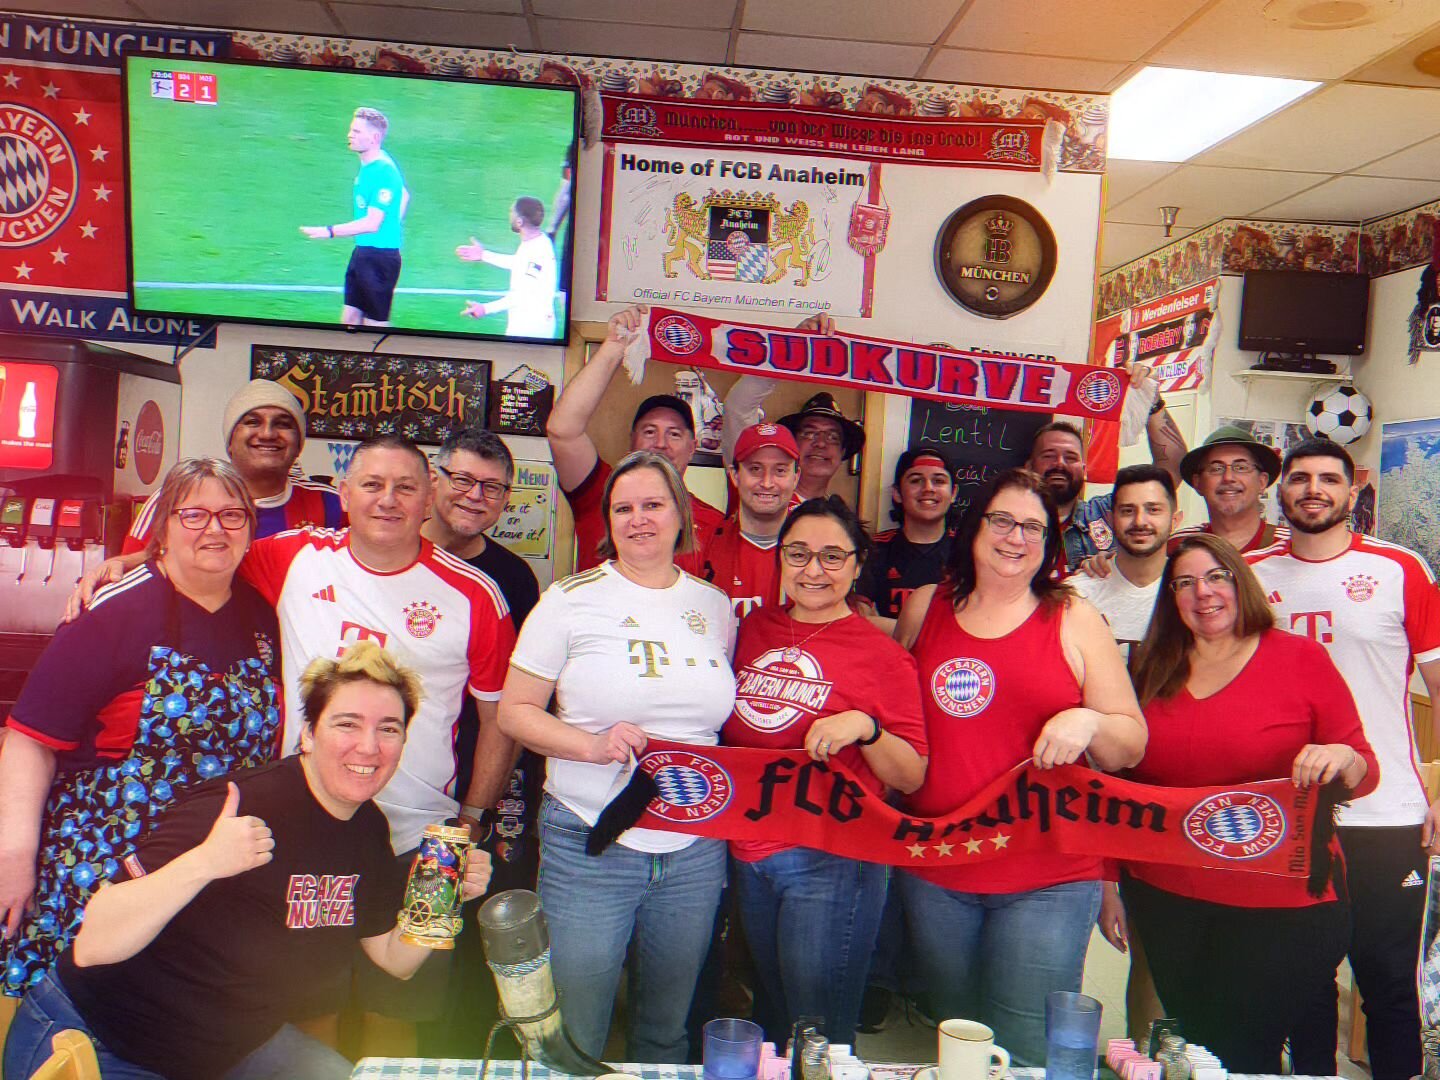 See, I told you the more we drink the better we look -er- the better we play!

#MiaSanMia #fcbayern #FCBAnaheim #MiaSanFamily #fcbrbl #SoCal #ContinentalDeli #soccersaturday #GermanDeli #Bundesliga